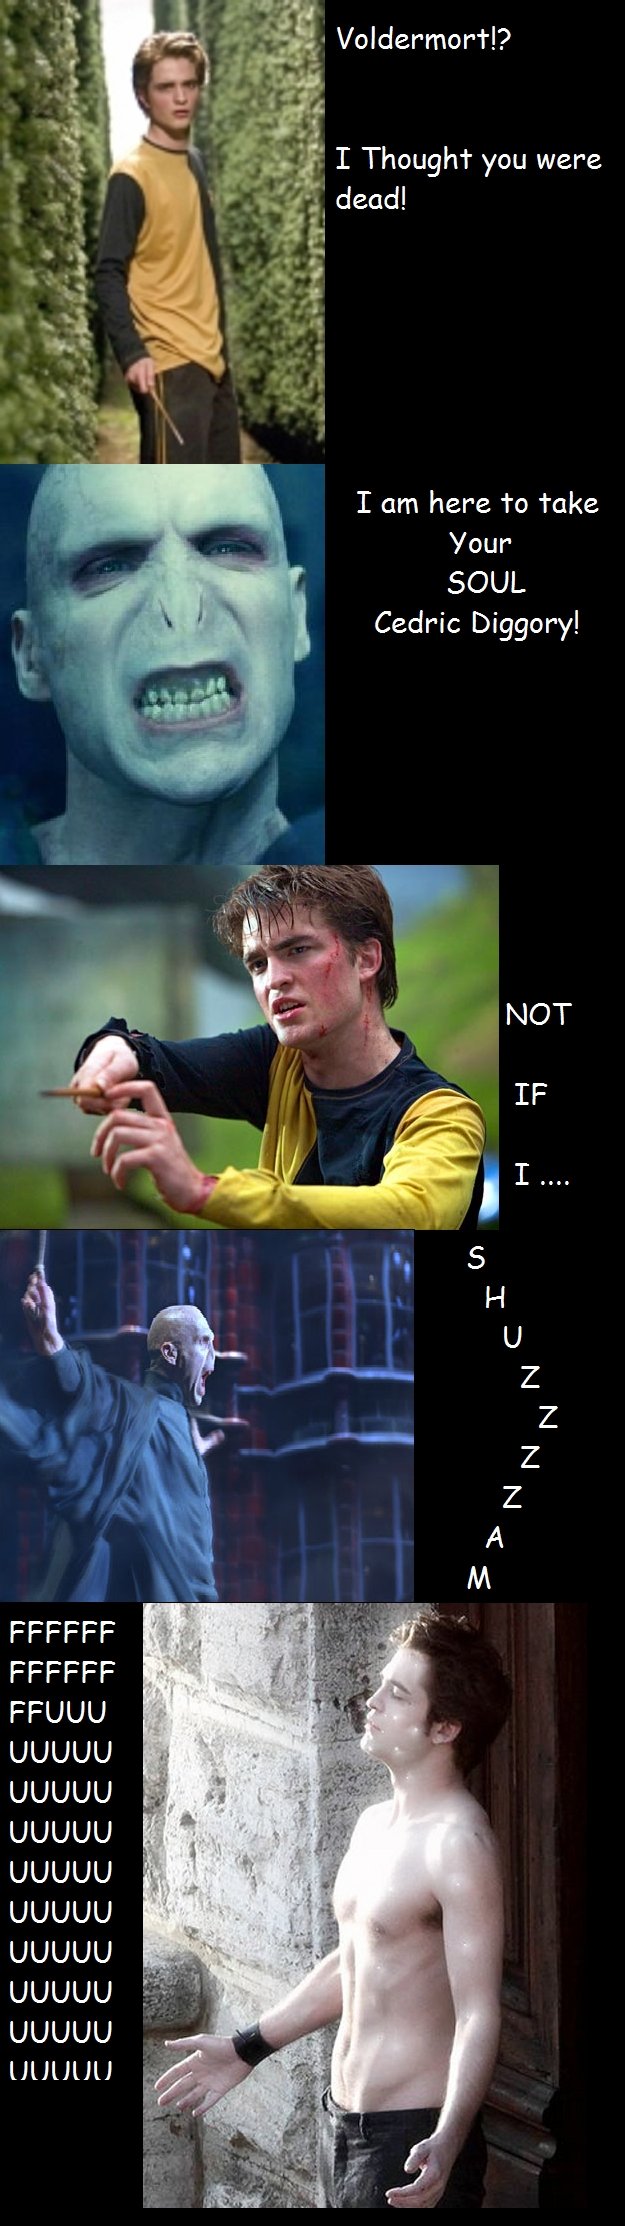 How Twilight Began. Now it makes sooo much sence!. aka! I am here to take Your SOUL Cedric Diggory! tatts 'tii' h NCH' FFCCFF FFCCFF. Is it just me, or does the way he sparkle look like the way jizz glows under a black light?